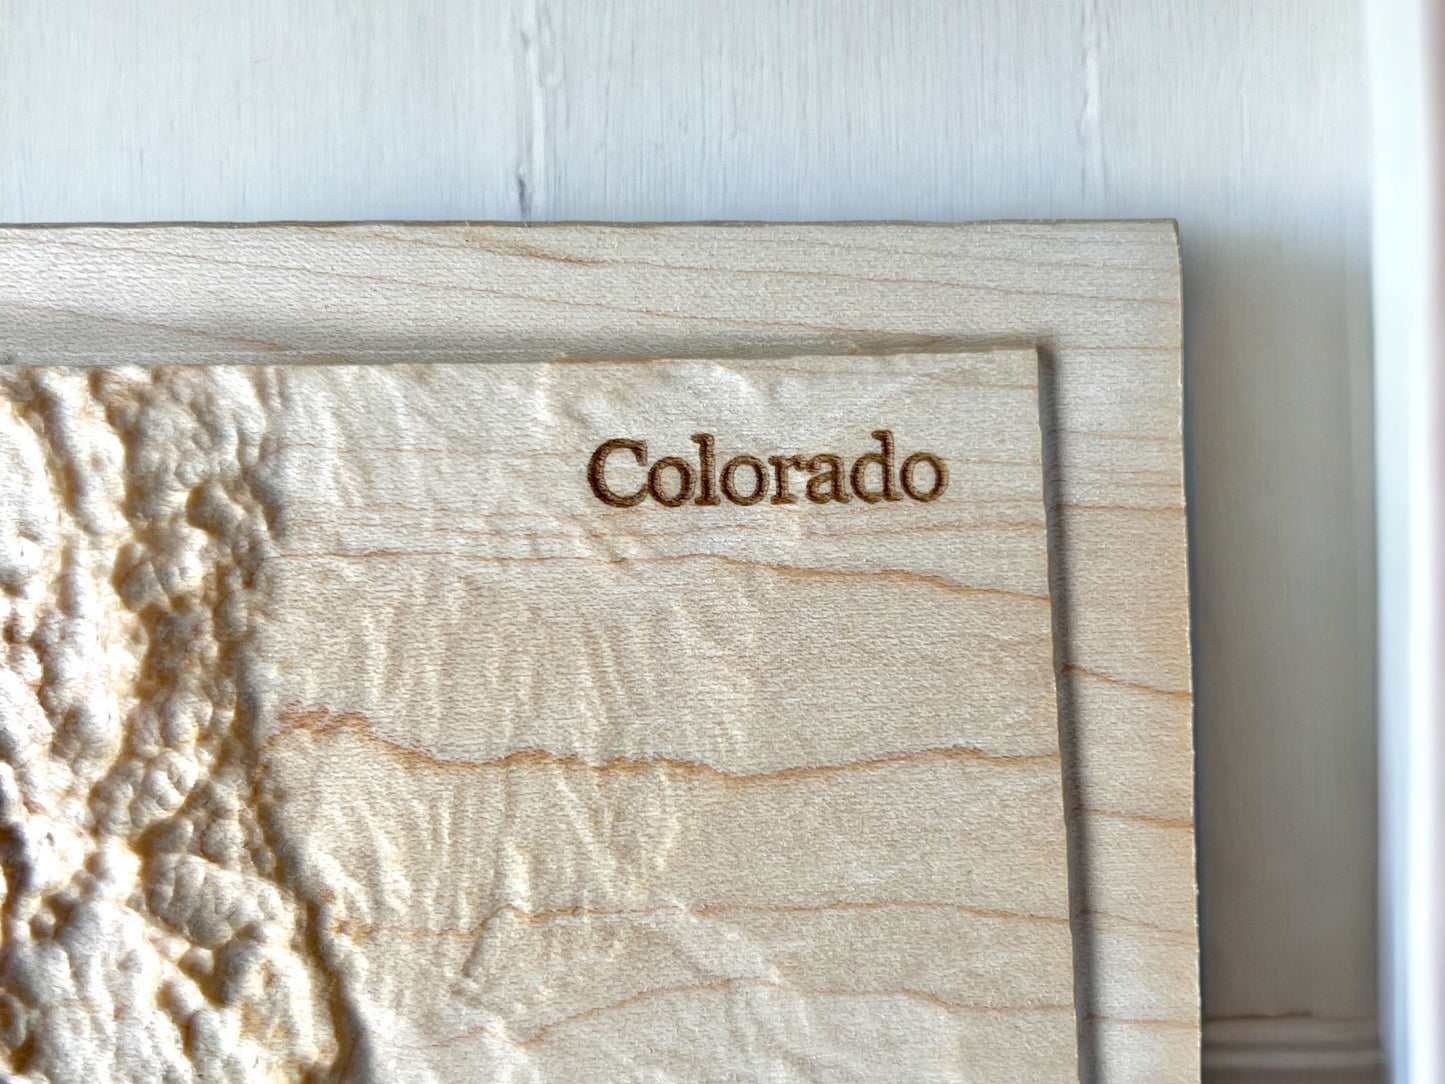 Colorado Map | Wood Carved Relief Map | 3D Topographic Wooden Map | Unique Wedding Anniversary Birthday Housewarming Gift | Colorado Gift